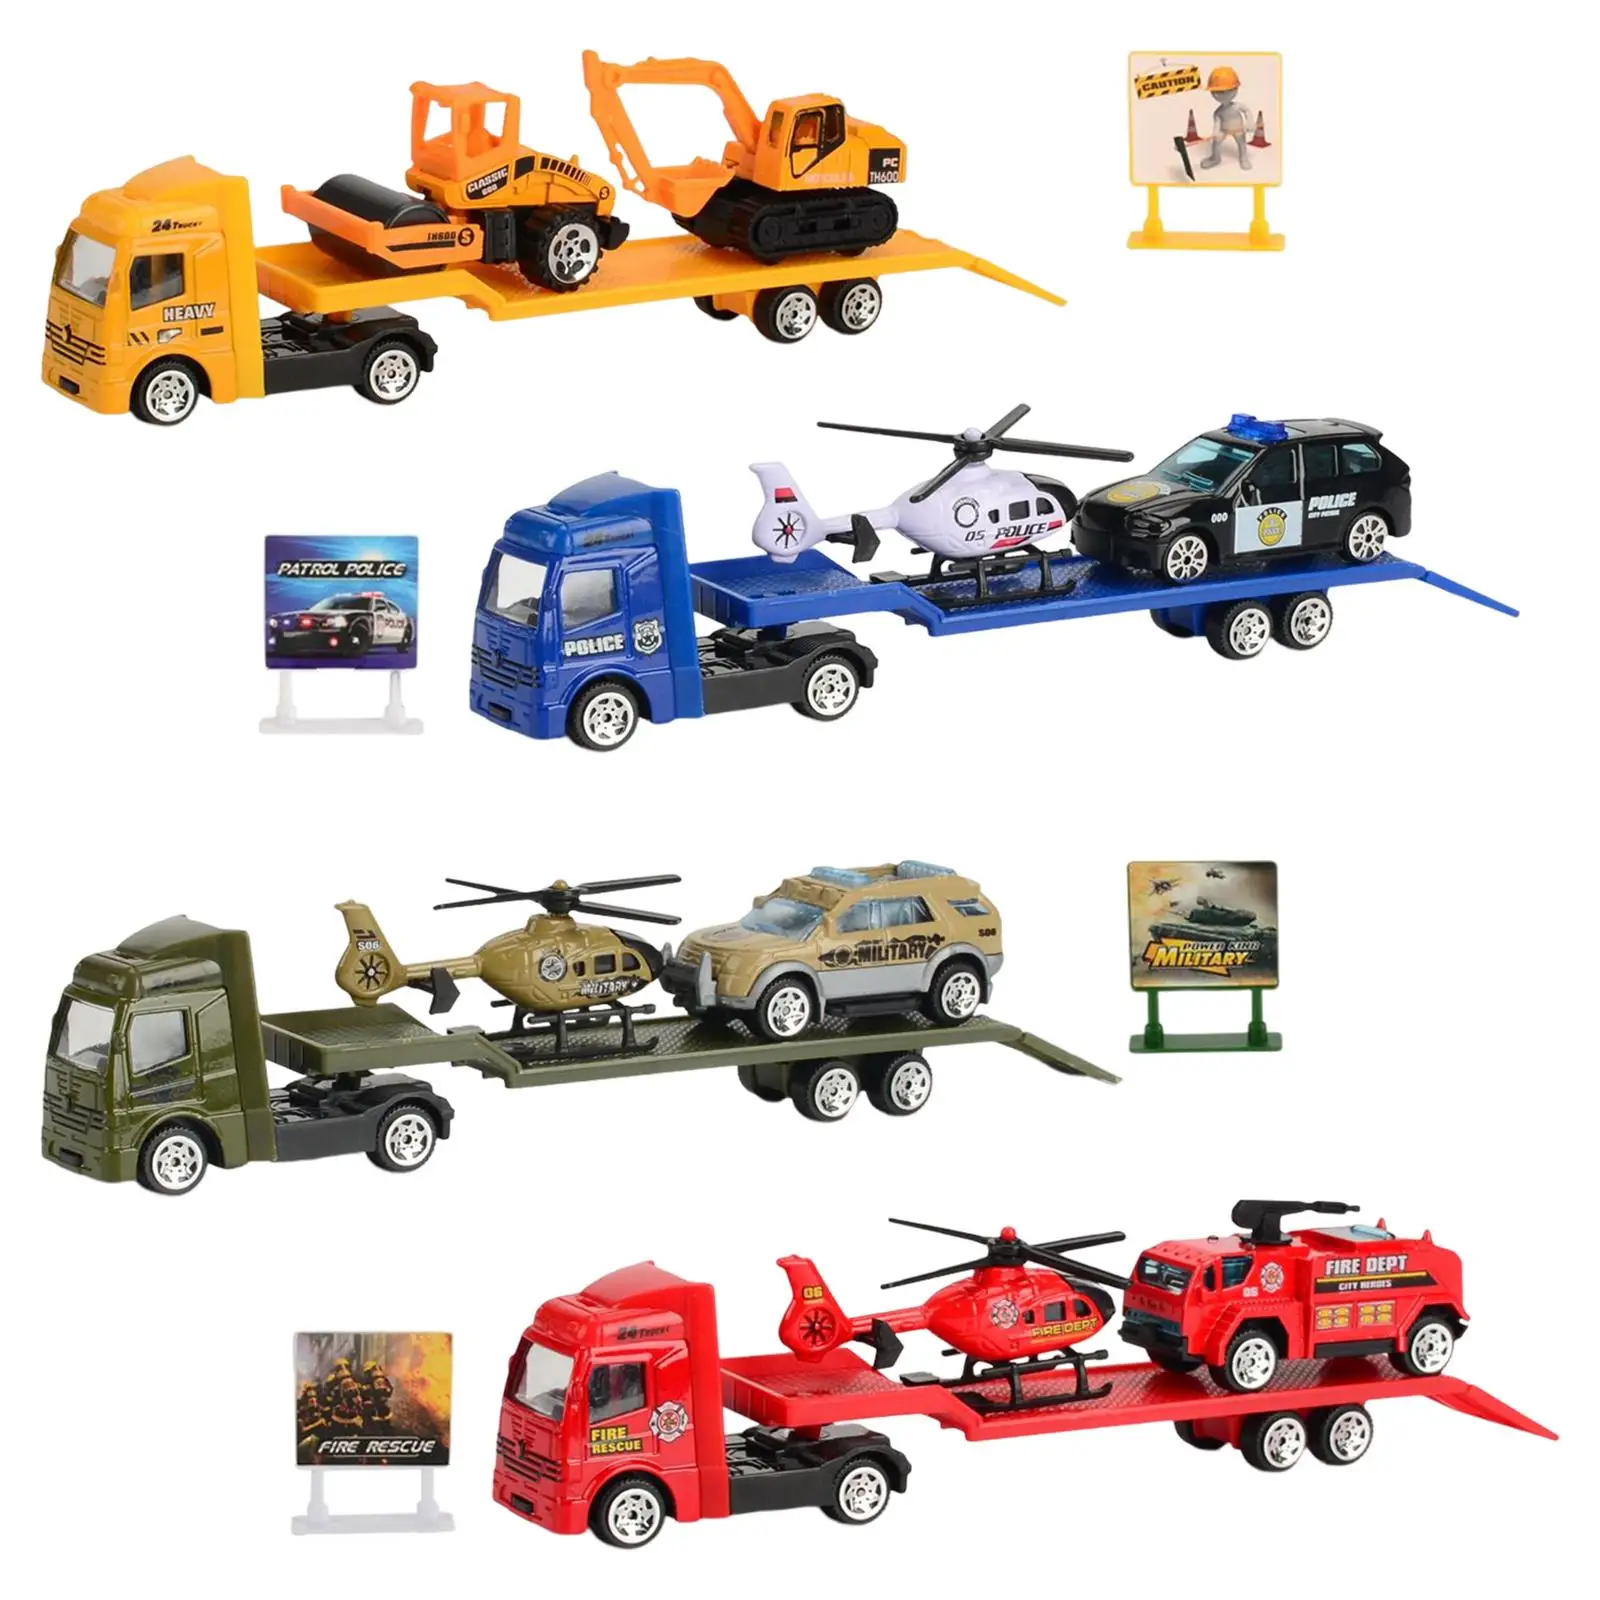 

Crane Trailer Tow Truck Toy Car Transporter Toy Alloy Diecasts Vehicle Educational Toys 1/64 Scale Tow Truck for Toddler Kids